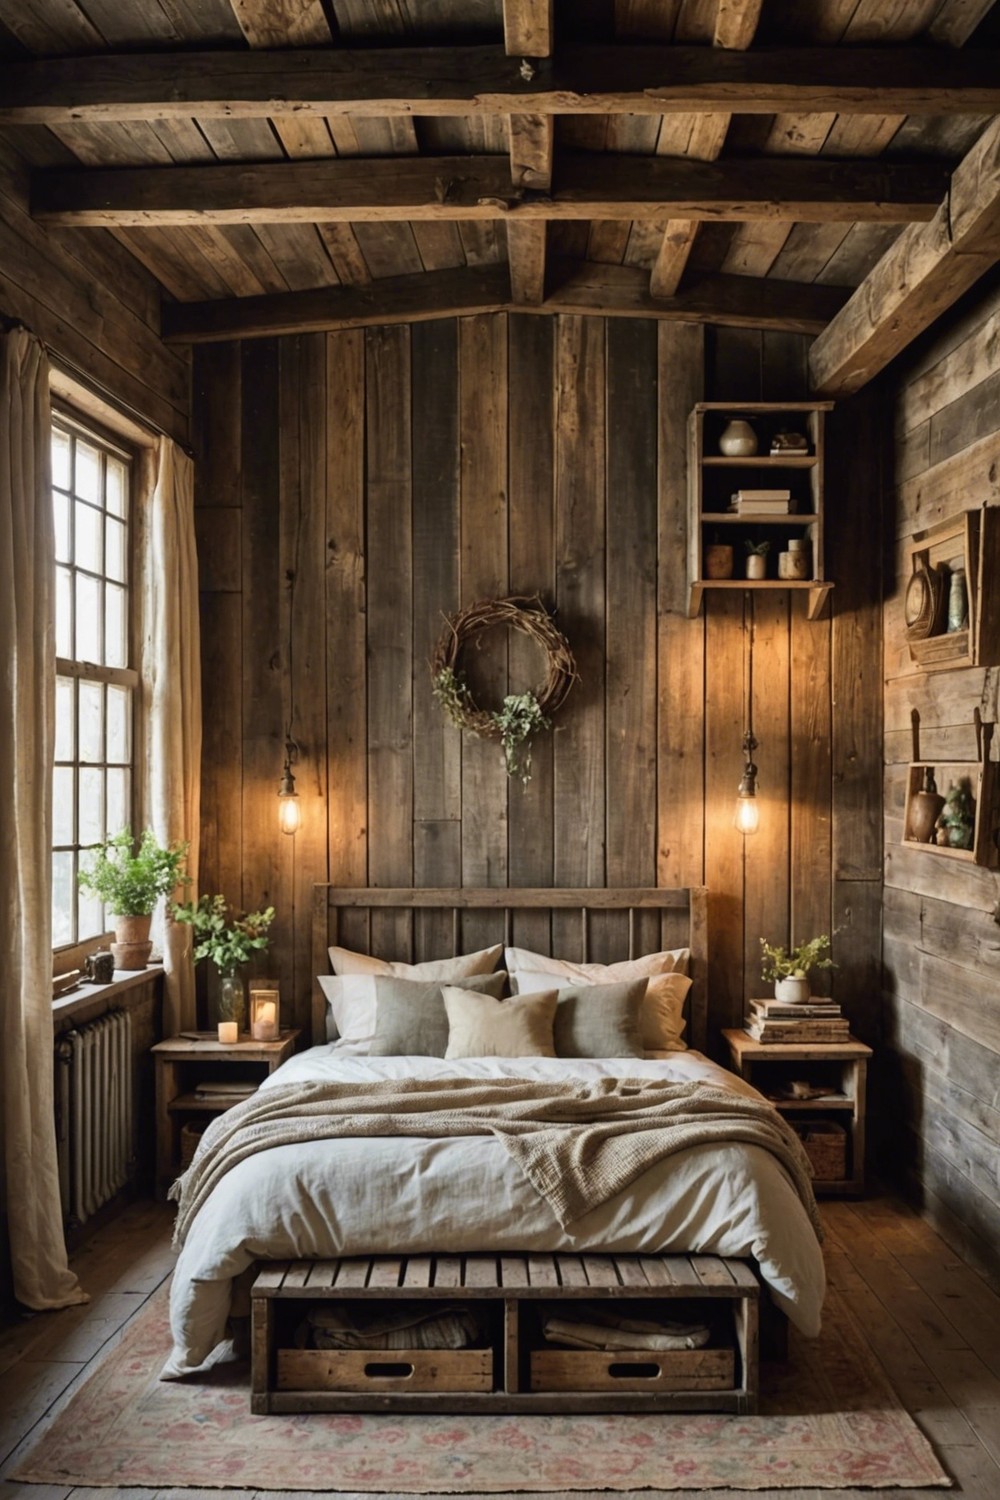 Rustic Wooden Accents